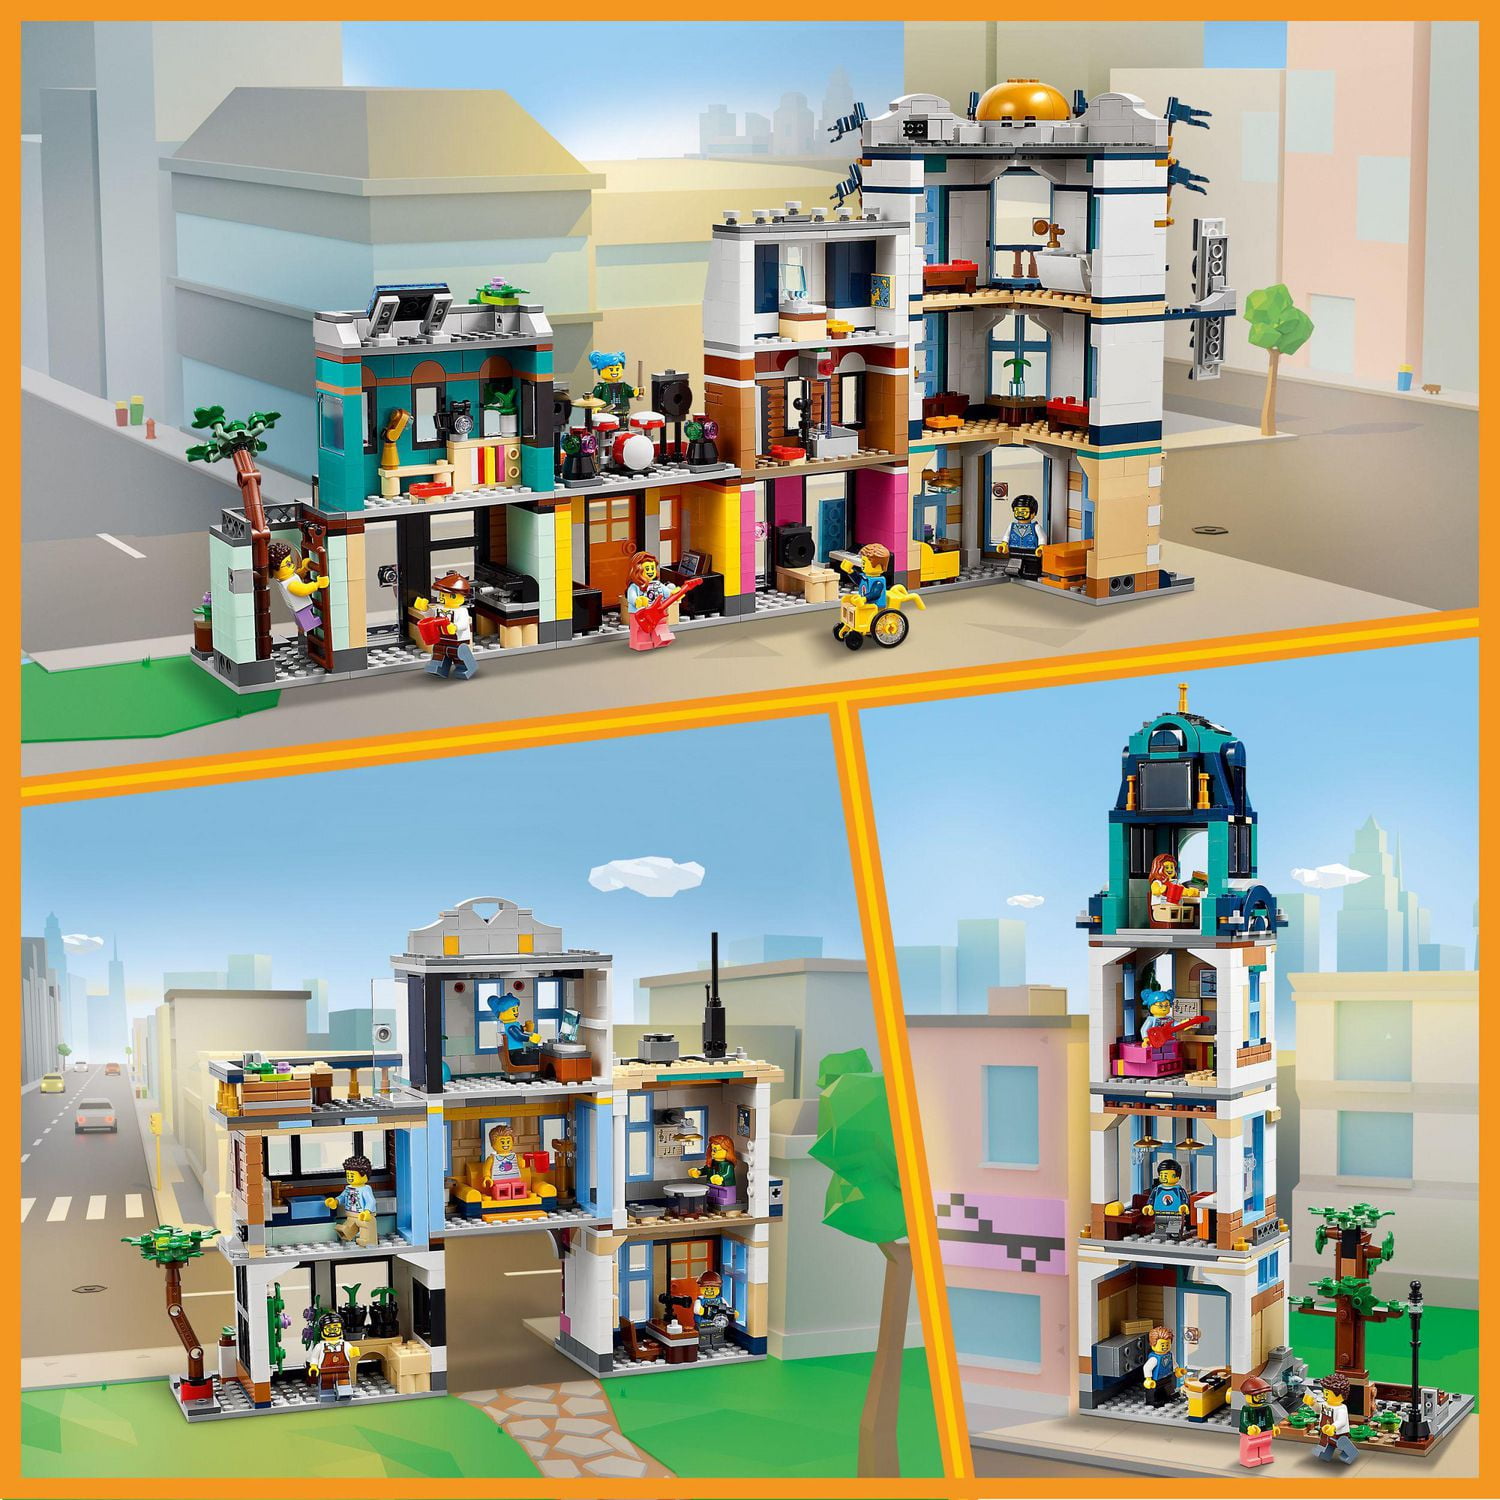 LEGO Creator Main Street 31141 Building Toy Set, 3 in 1 Features a Toy City  Art Deco Building, Market Street Hotel, Café Music Store and 6 Minifigures,  Endless Play Possibilities for Boys